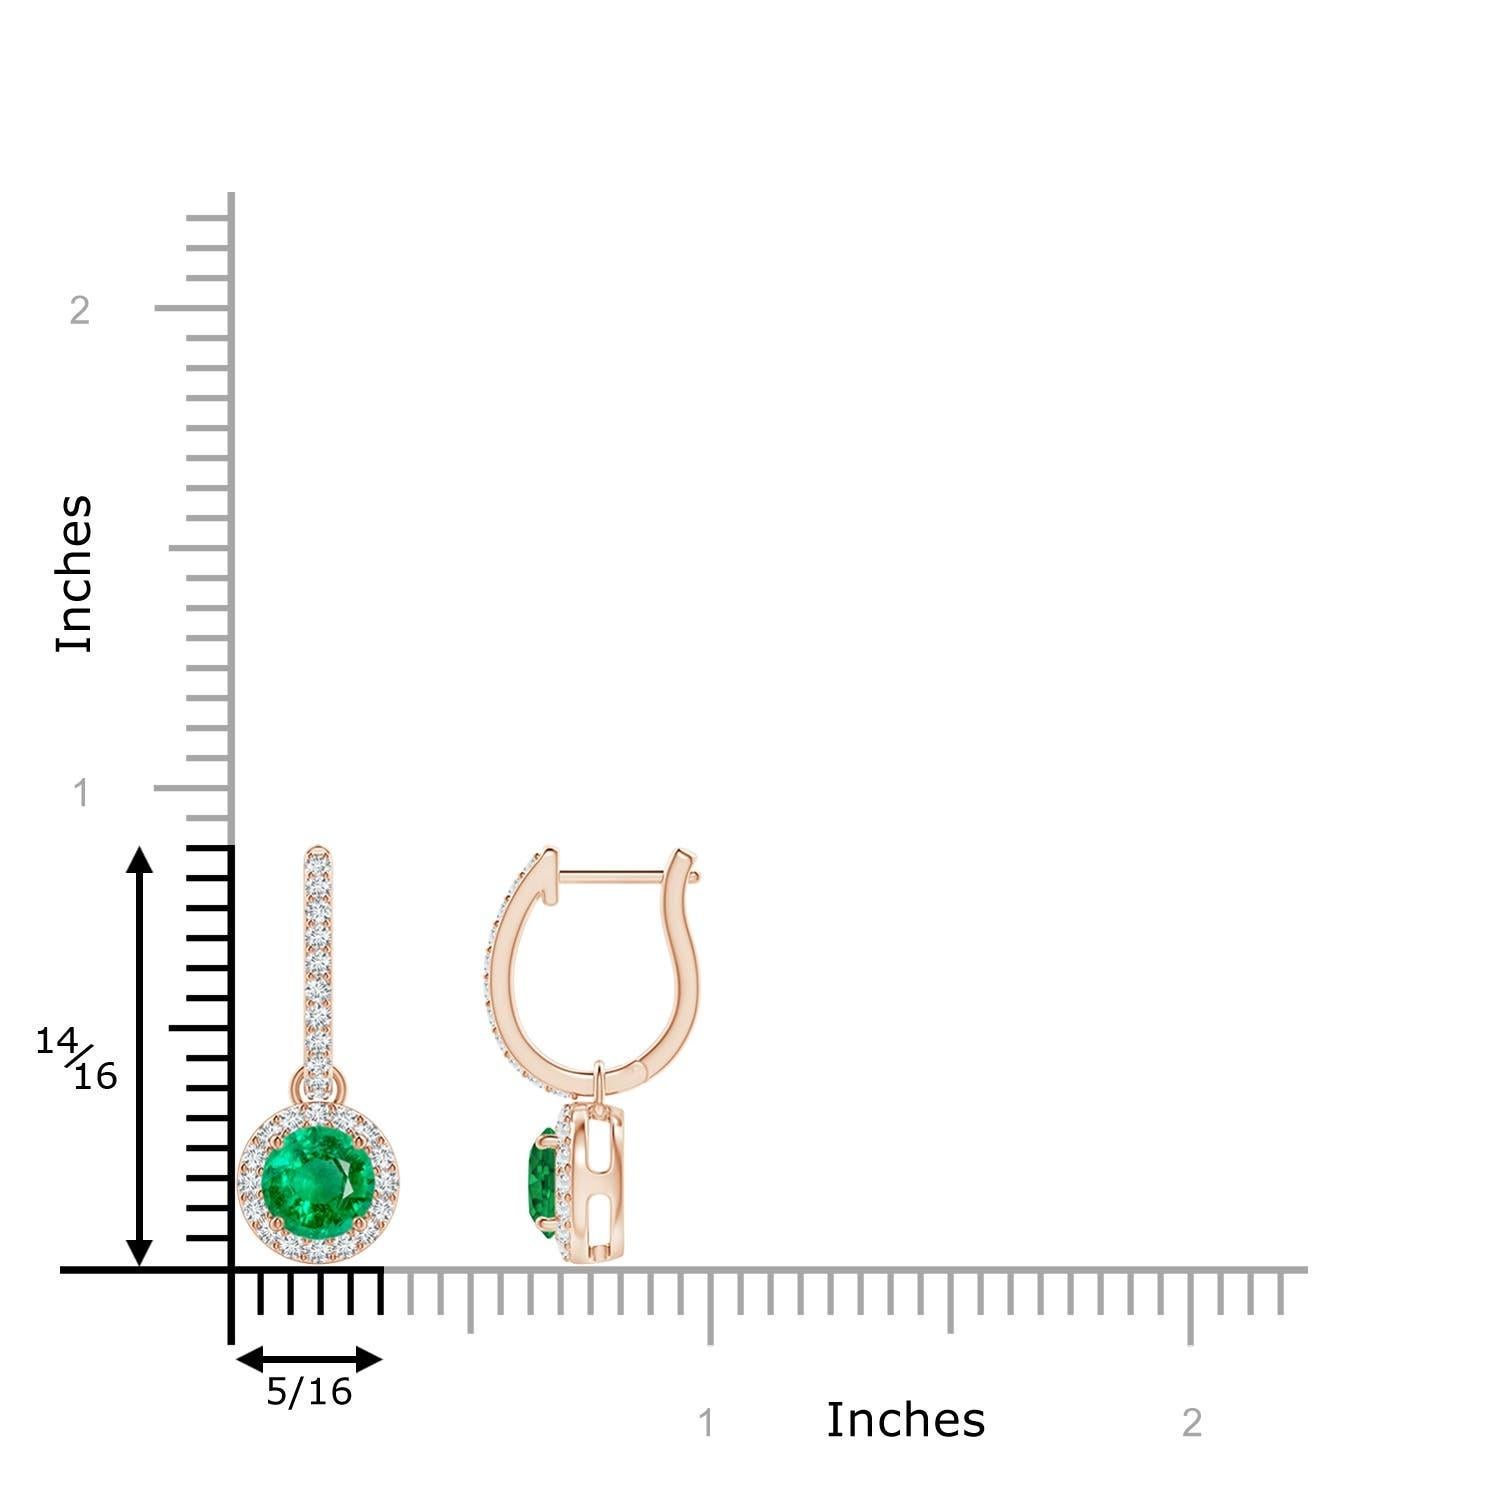 Nestled within a glimmering halo of round diamonds are round lush green emeralds in prong settings. The diamond accents on the hoop lend an additional touch of elegance to these emerald dangle earrings crafted in 14k rose gold.
Emerald is the